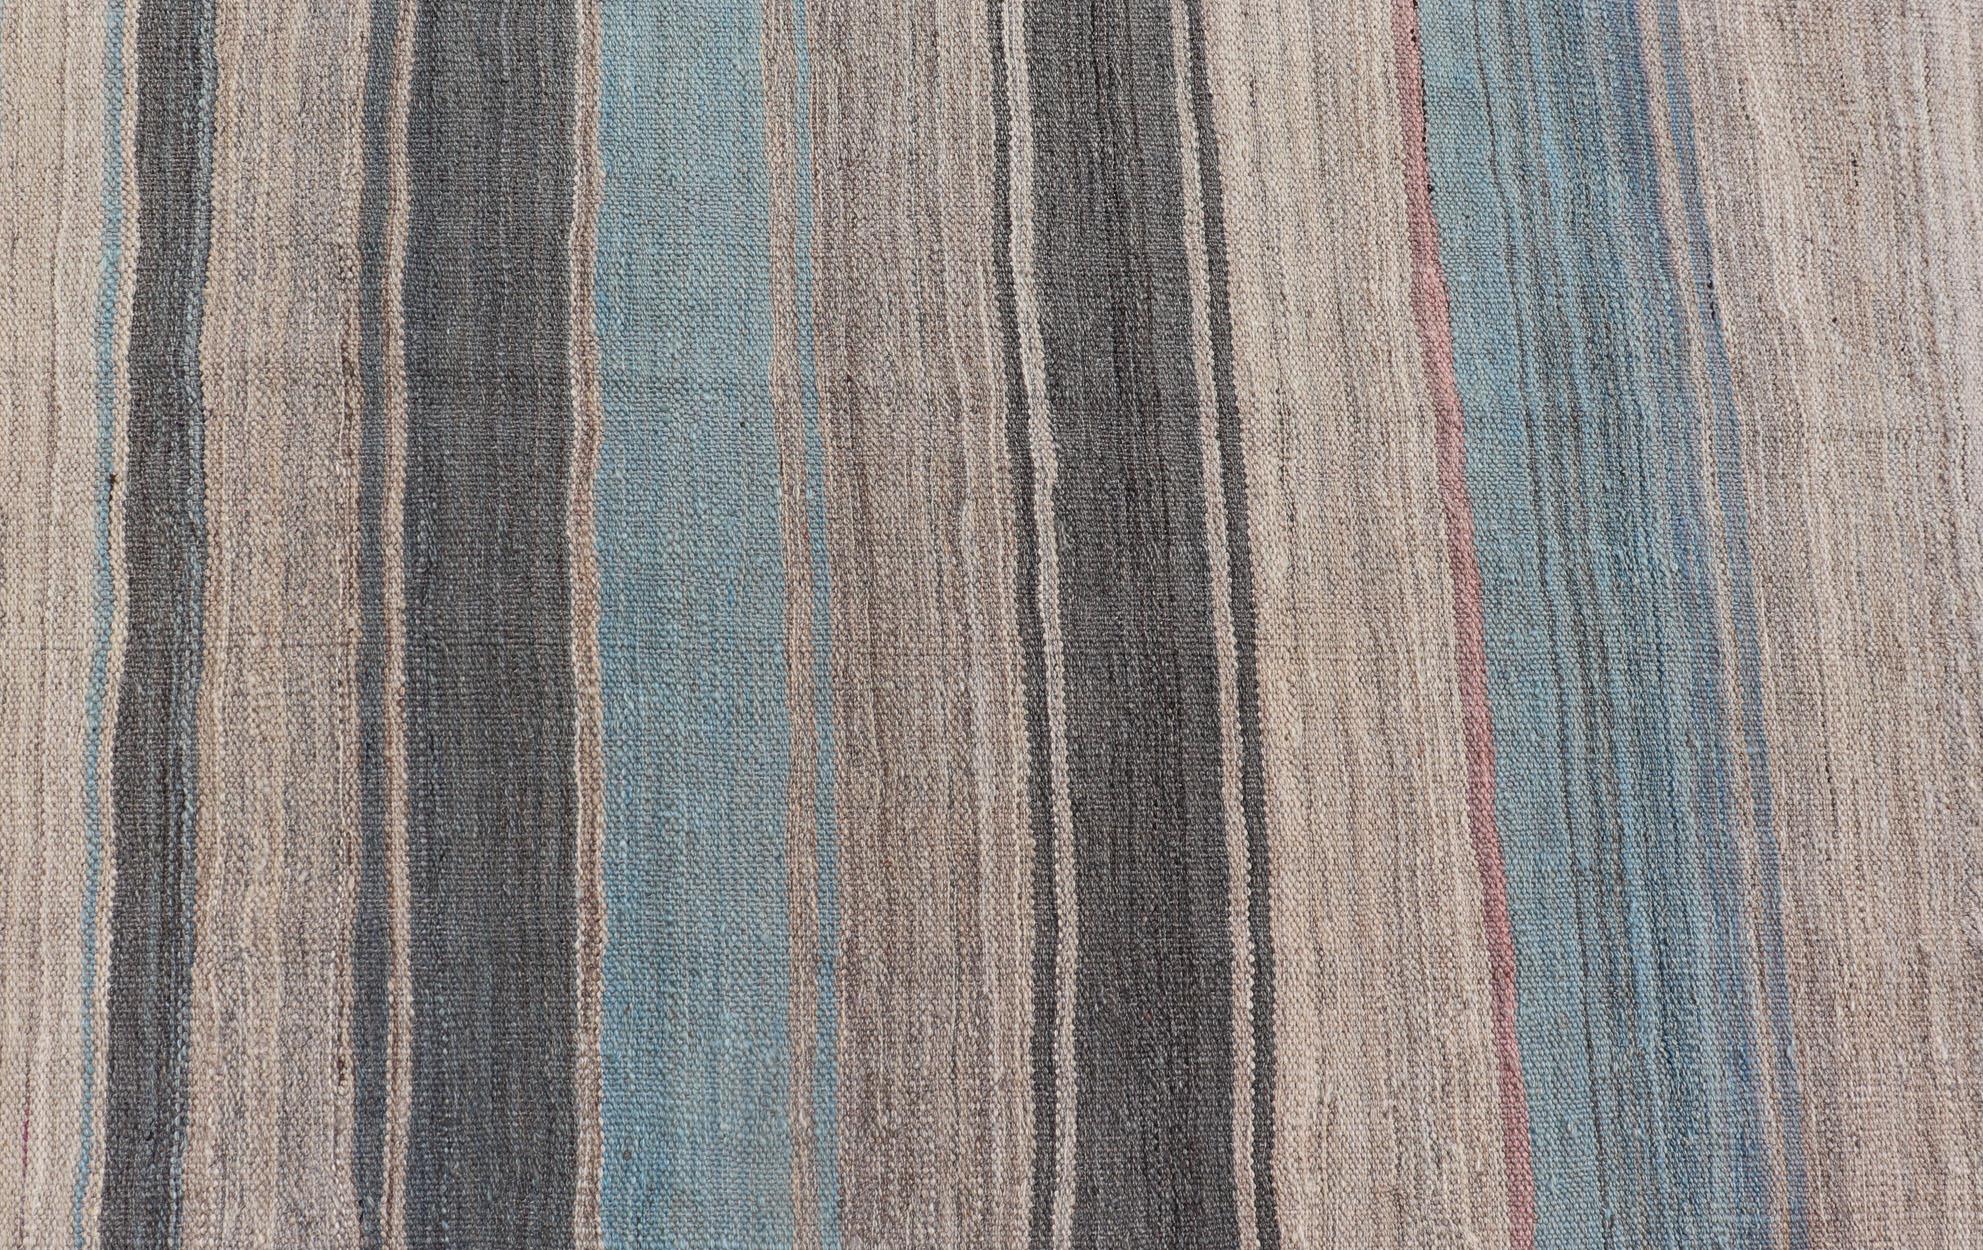 Modern Kilim Rug with Large Stripes in Shades of Blue, Taupe, Gray For Sale 5